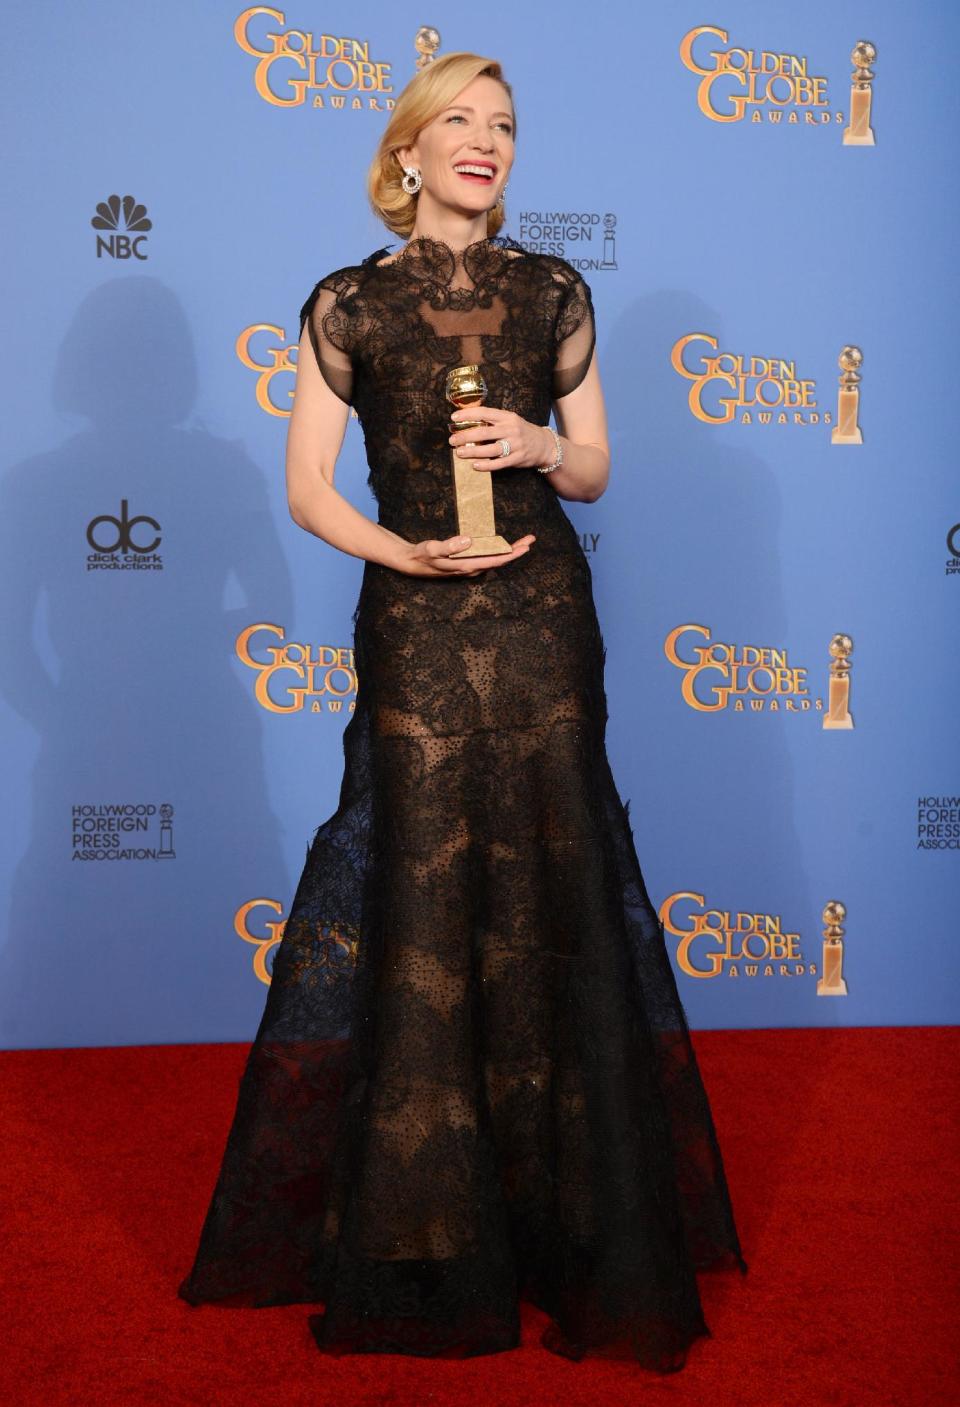 Cate Blanchett poses in the press room with the award for best actress in a motion picture - drama for "Blue Jasmine" at the 71st annual Golden Globe Awards at the Beverly Hilton Hotel on Sunday, Jan. 12, 2014, in Beverly Hills, Calif. (Photo by Jordan Strauss/Invision/AP)